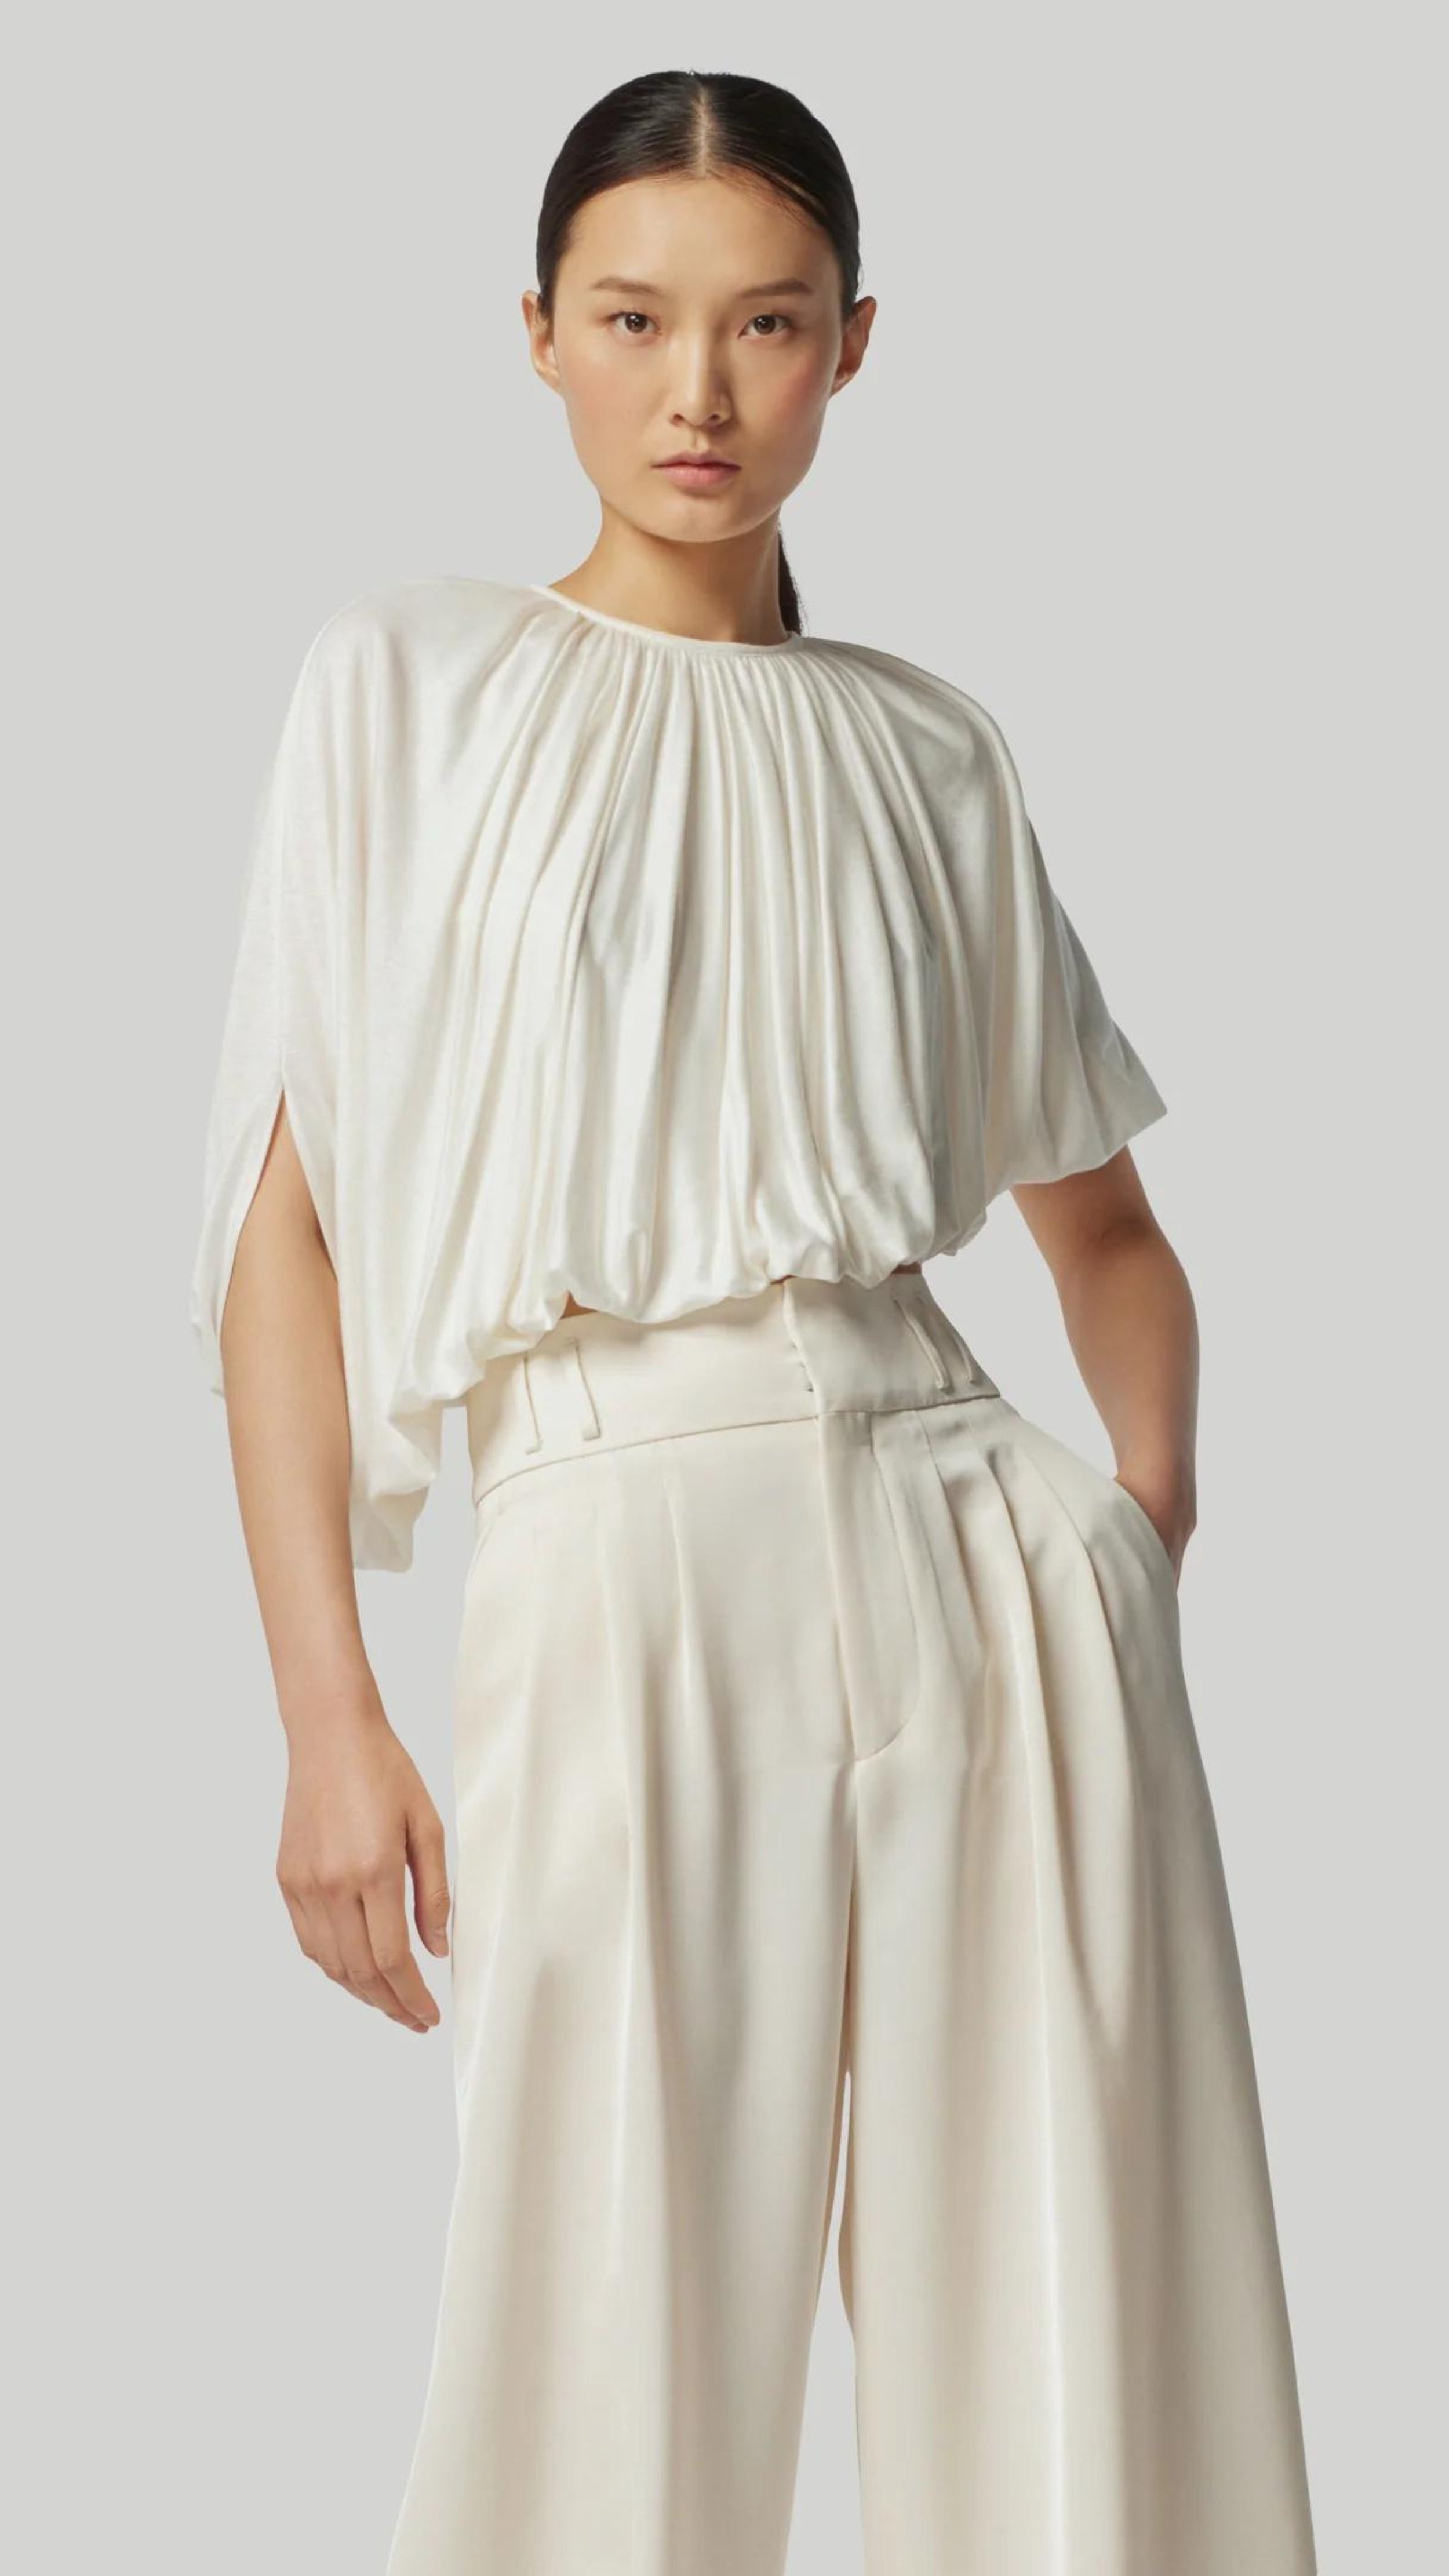 Altuzarra Naxos Top in Ivory. Draped jersey create a fluid look with an asymmetrical hemline. Shown on model facing to the front.